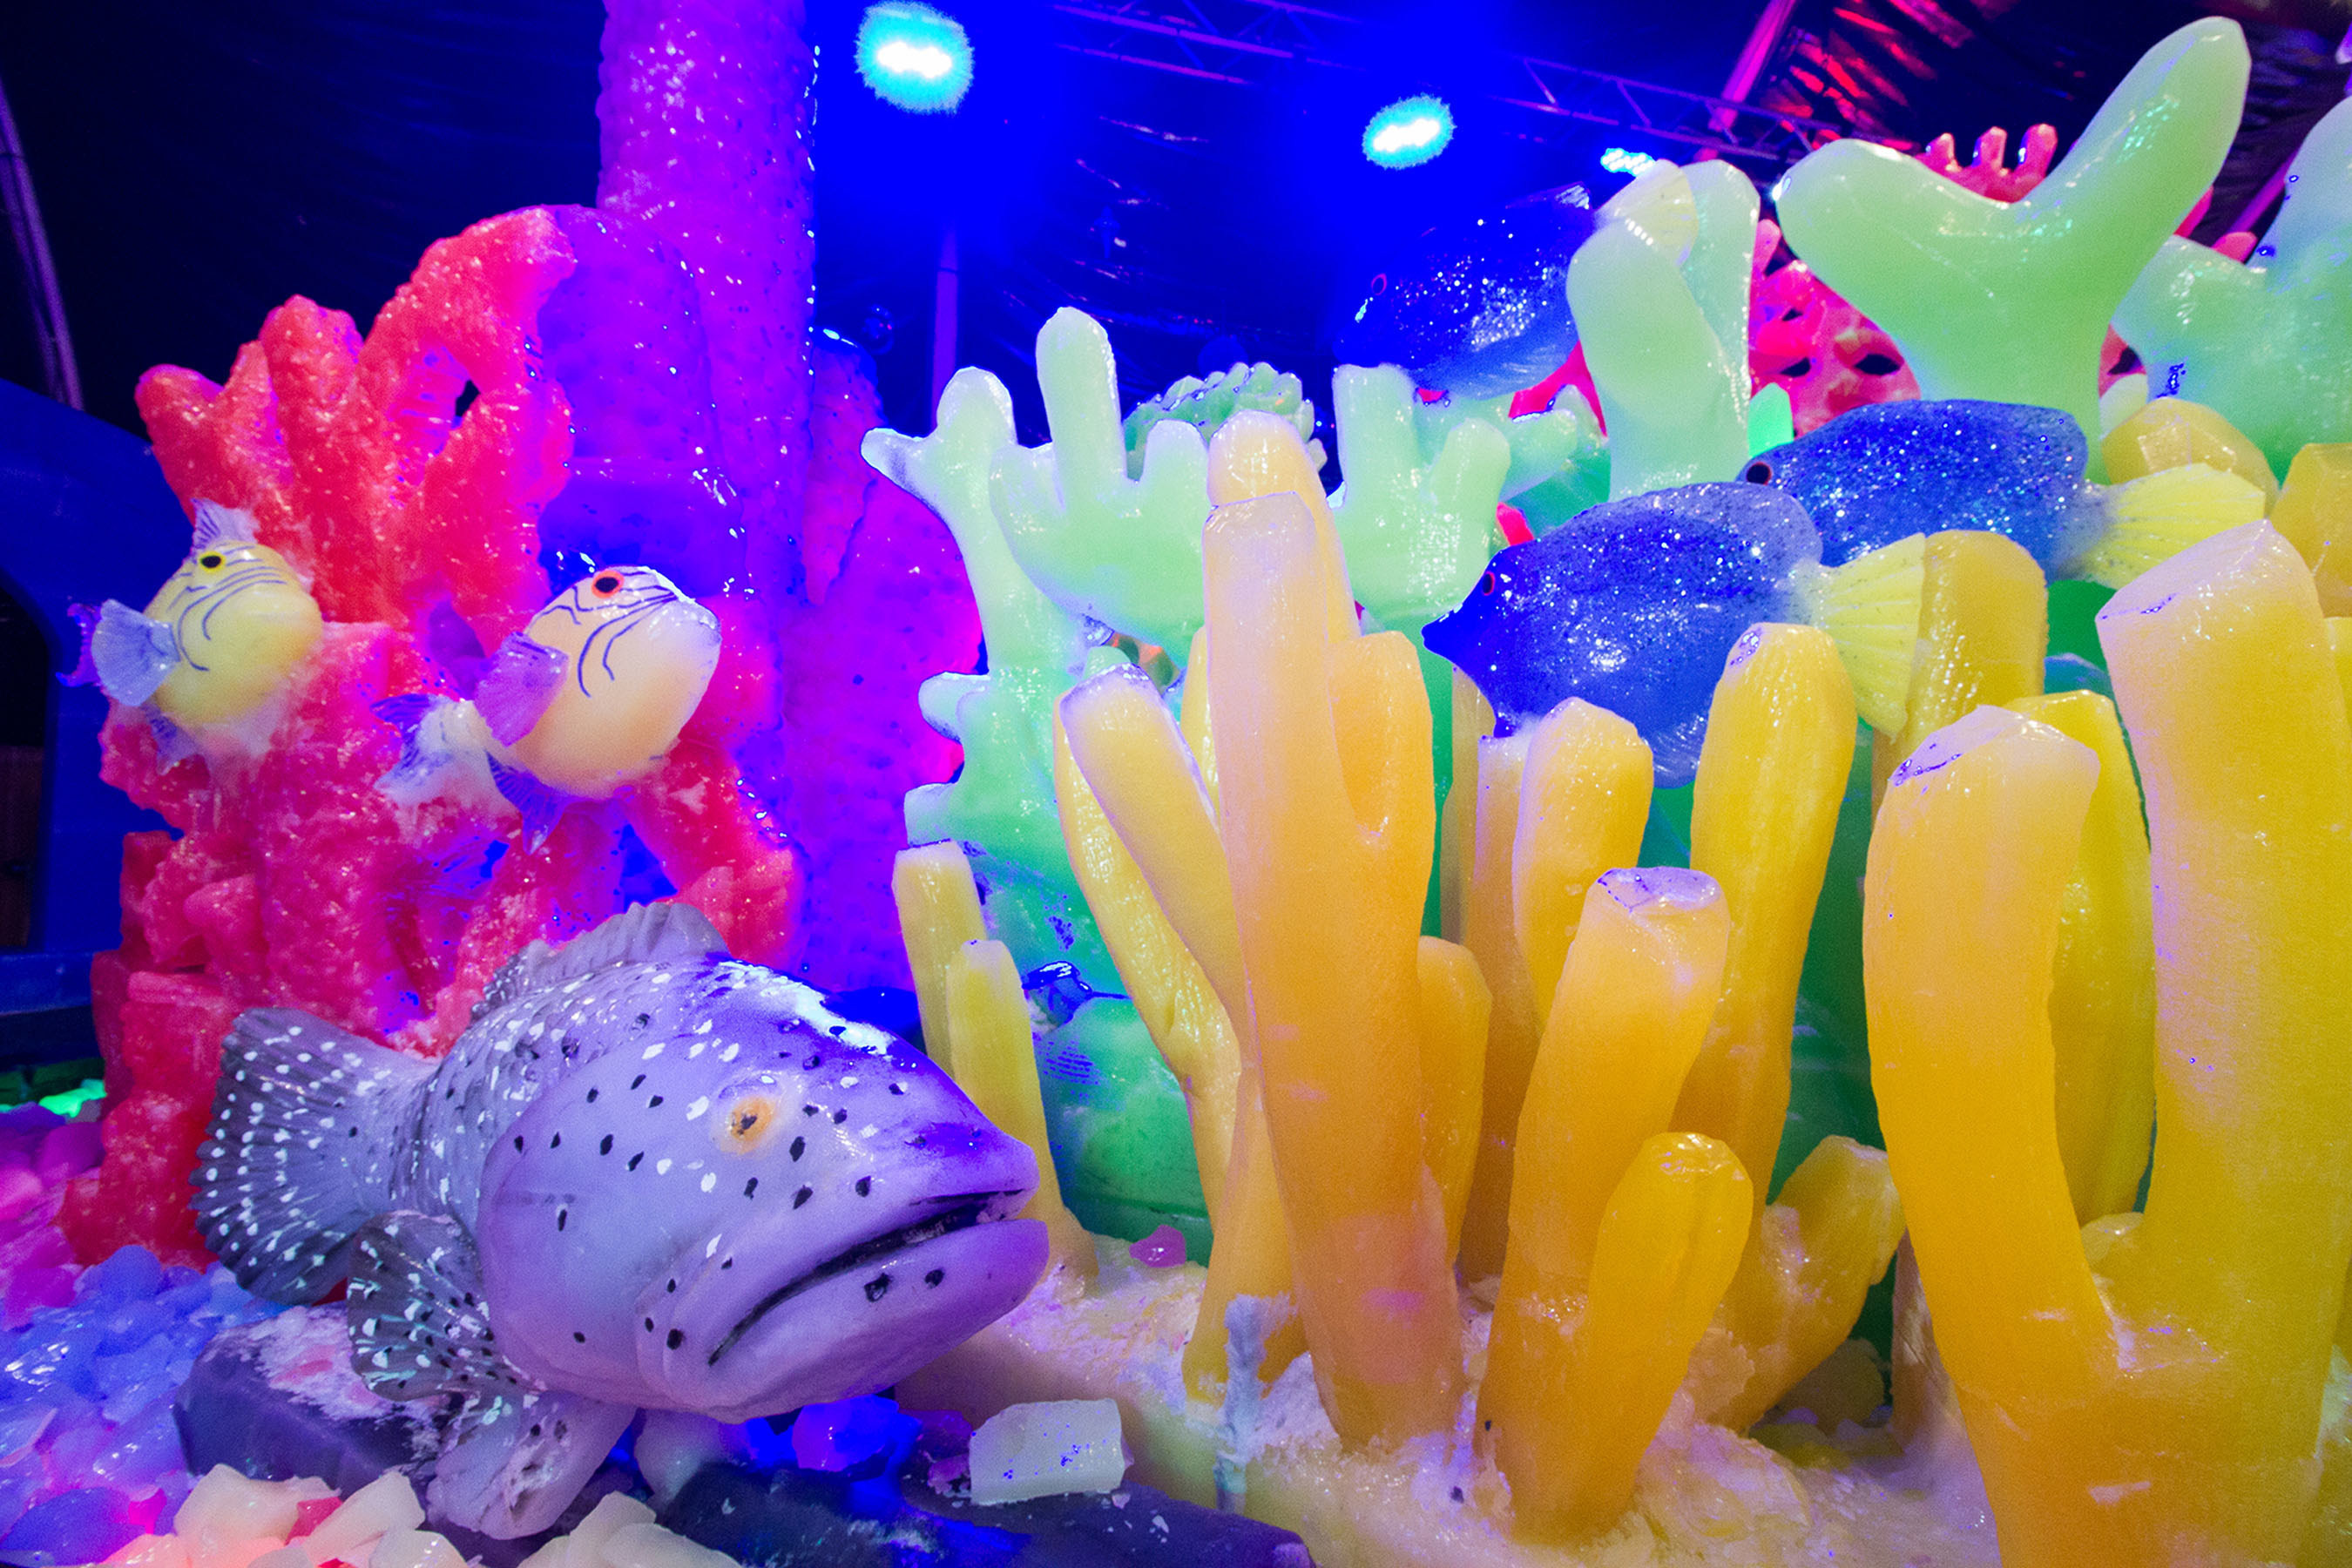 The ICE LAND: Ice Sculptures attraction opened Saturday at Moody Gardens with a new Caribbean Christmas theme with sculptures carved out of 2 million pounds of ice.